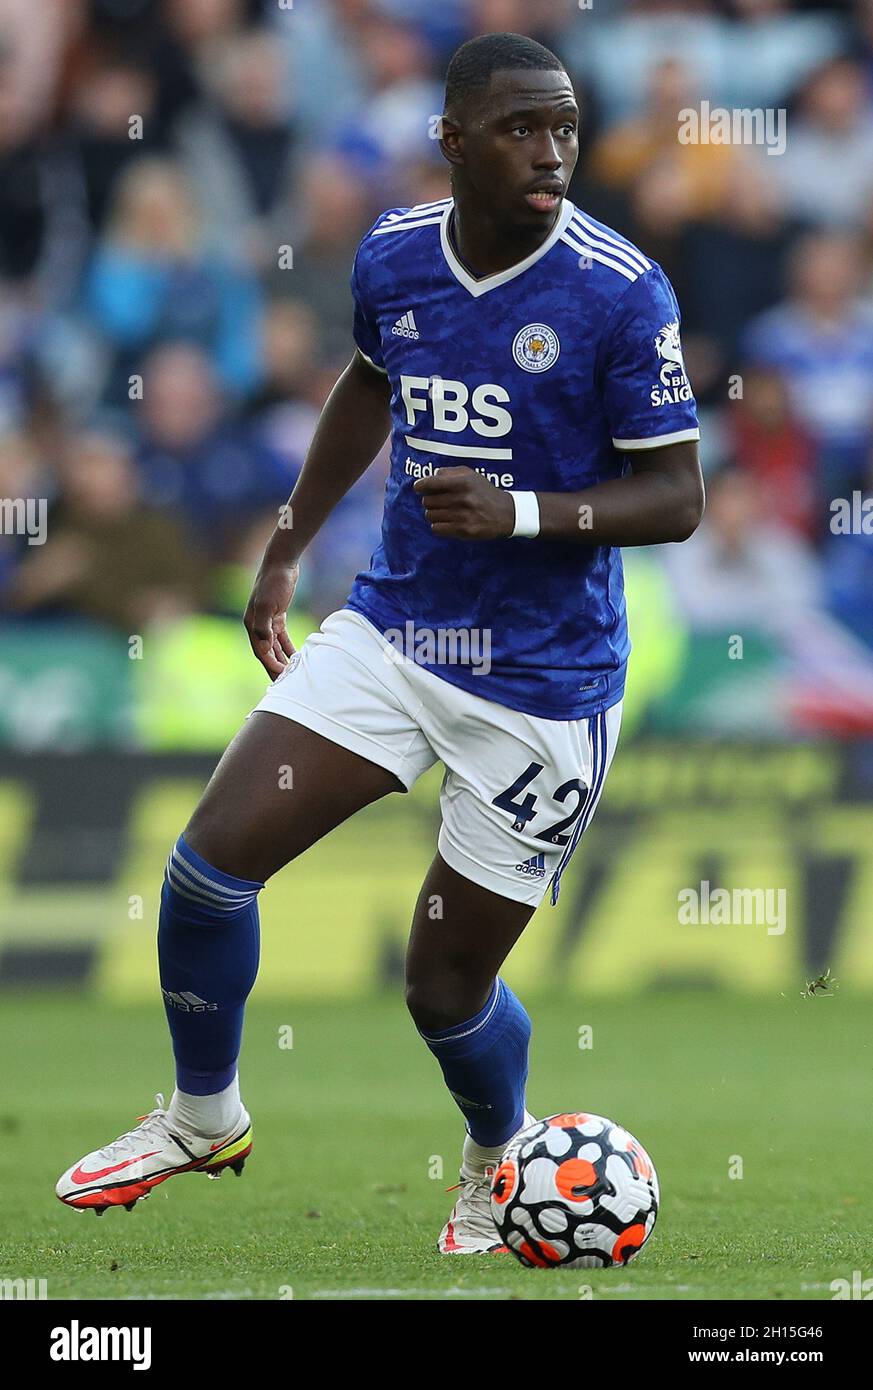 Leicester, England, 16th October 2021.  Boubakary Soumare of Leicester City during the Premier League match at the King Power Stadium, Leicester. Picture credit should read: Darren Staples / Sportimage Stock Photo